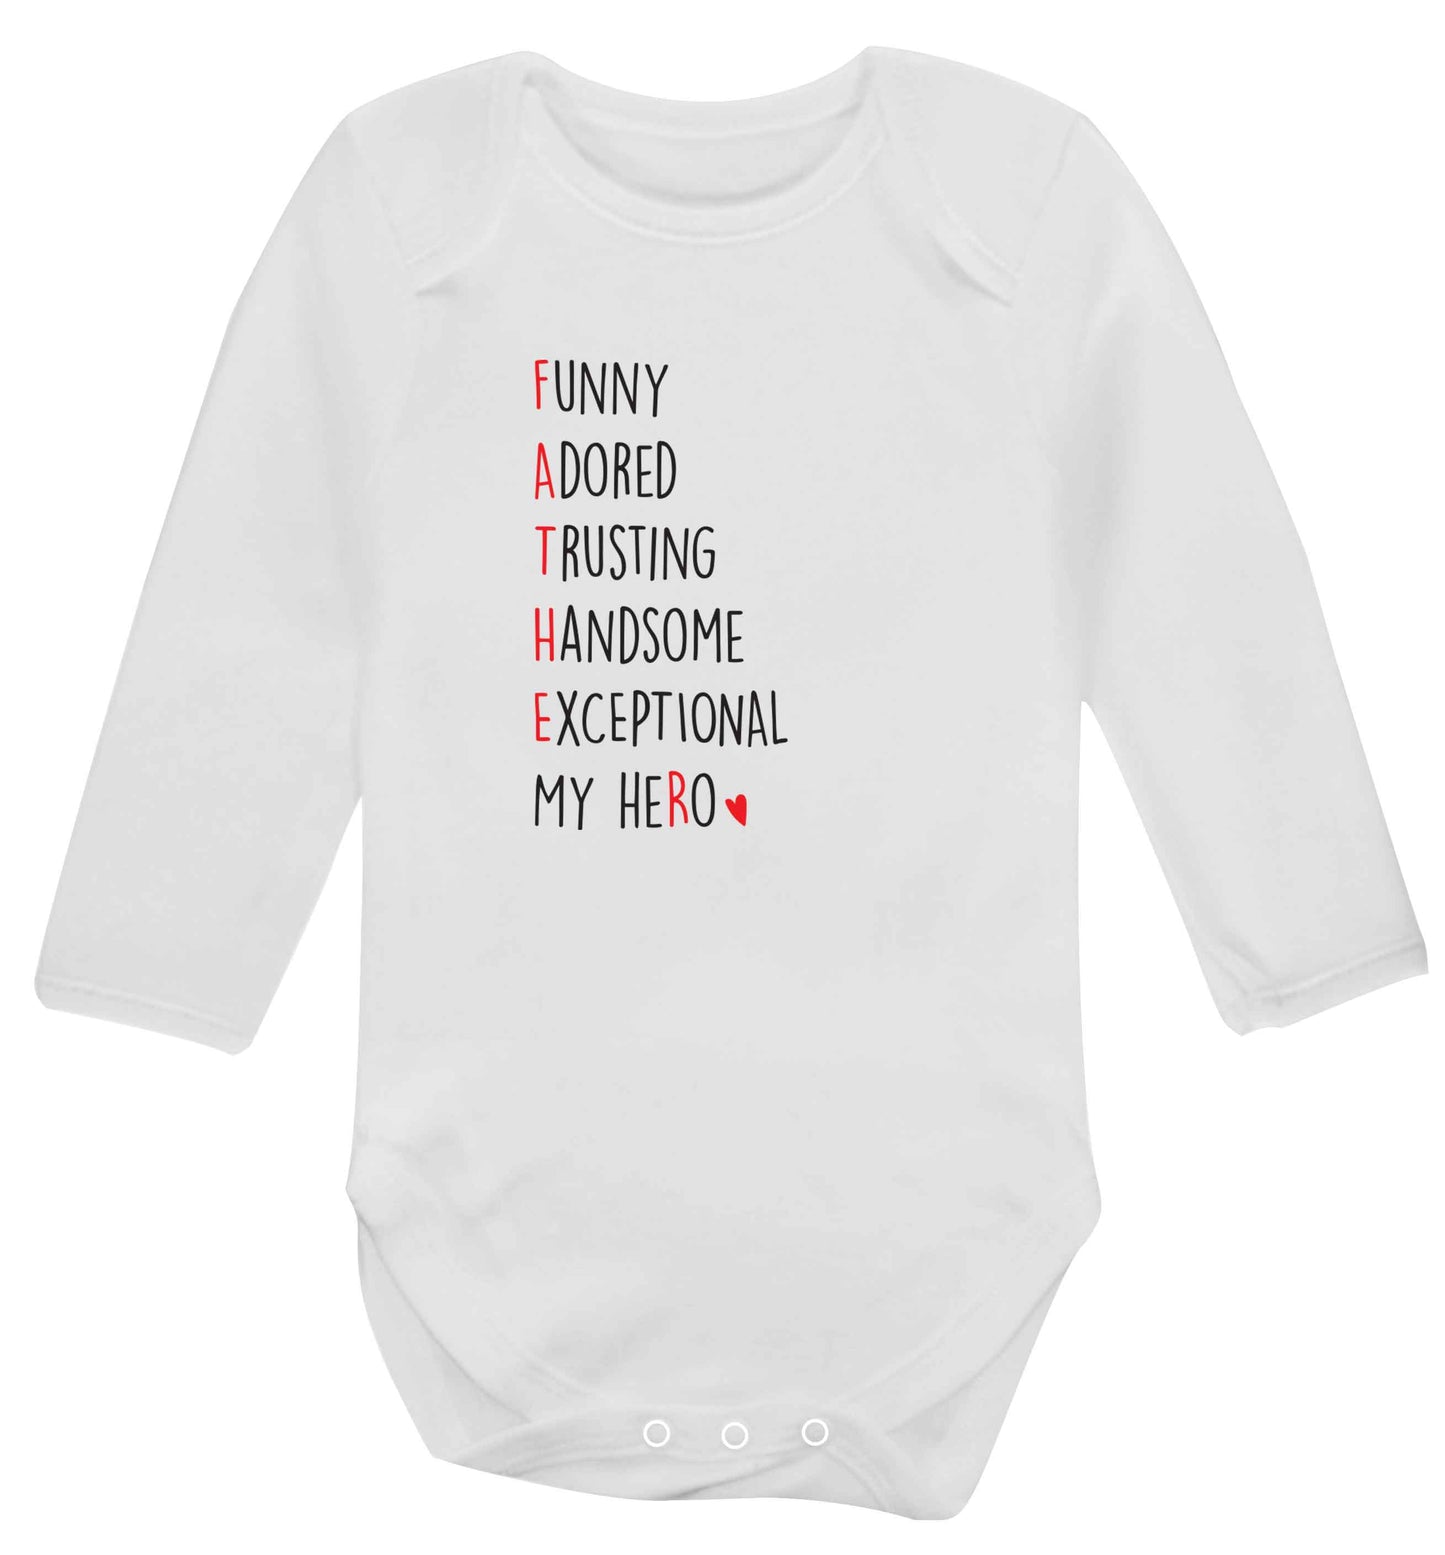 Father, funny adored trusting handsome exceptional my hero baby vest long sleeved white 6-12 months